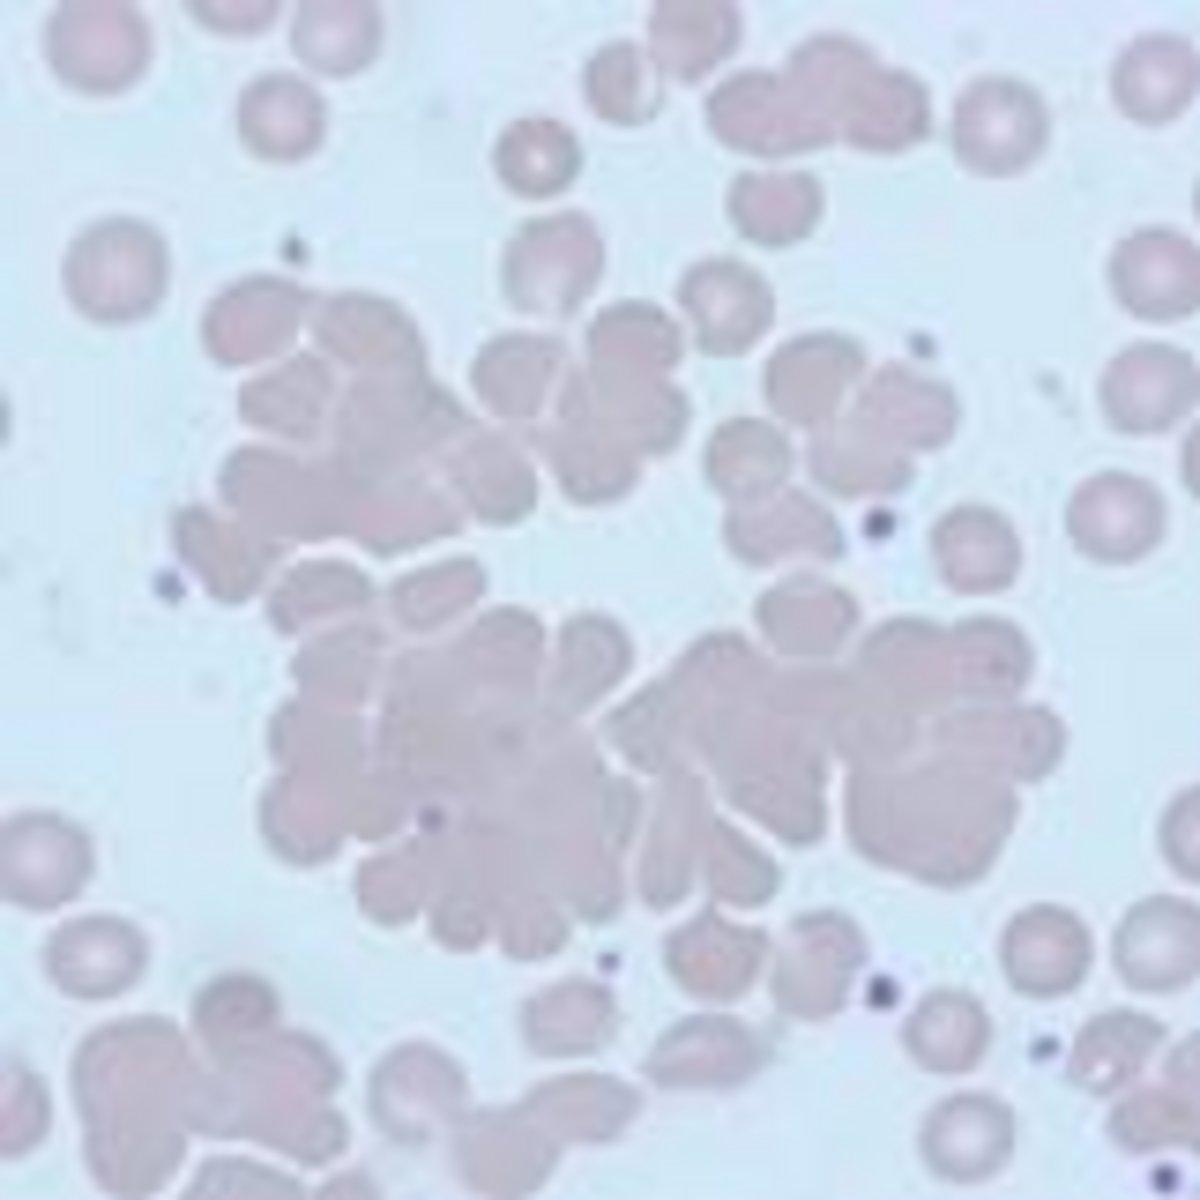 Cabot rings in Blood smear - YouTube